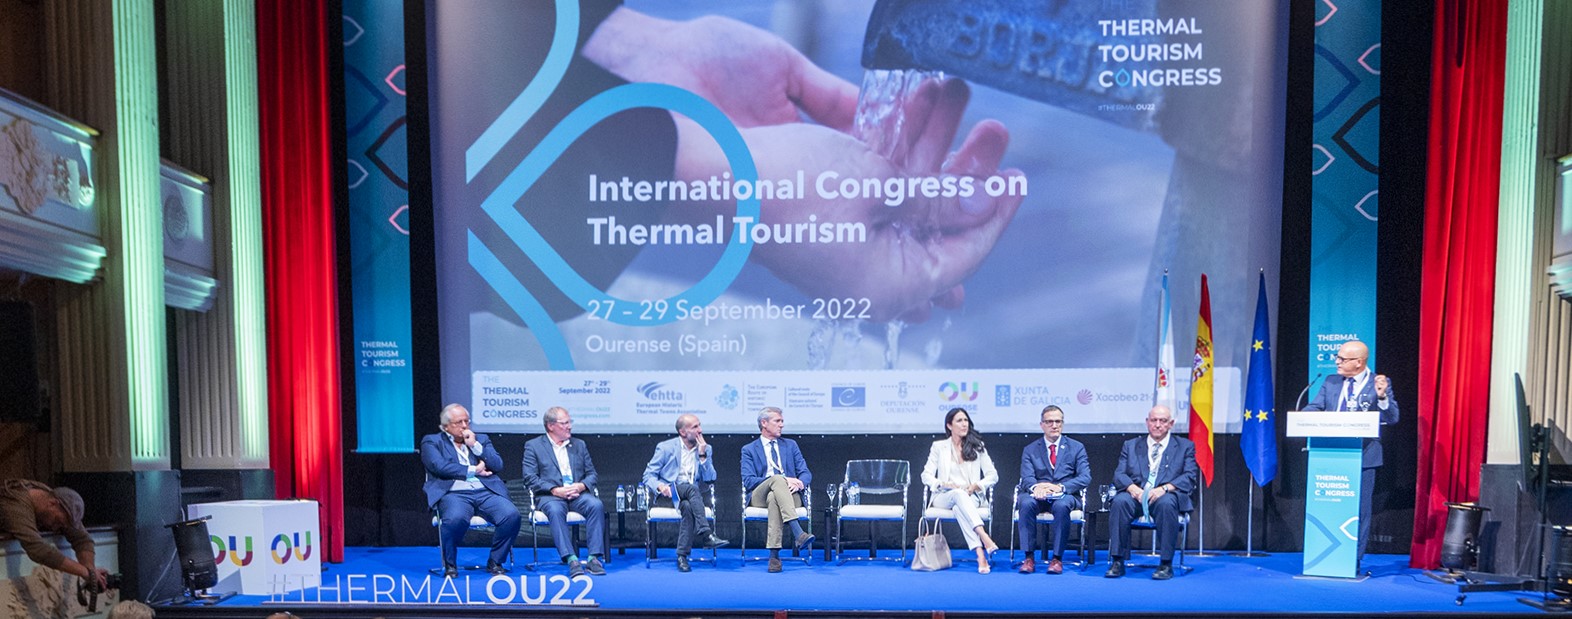 Thermal Congress Opening